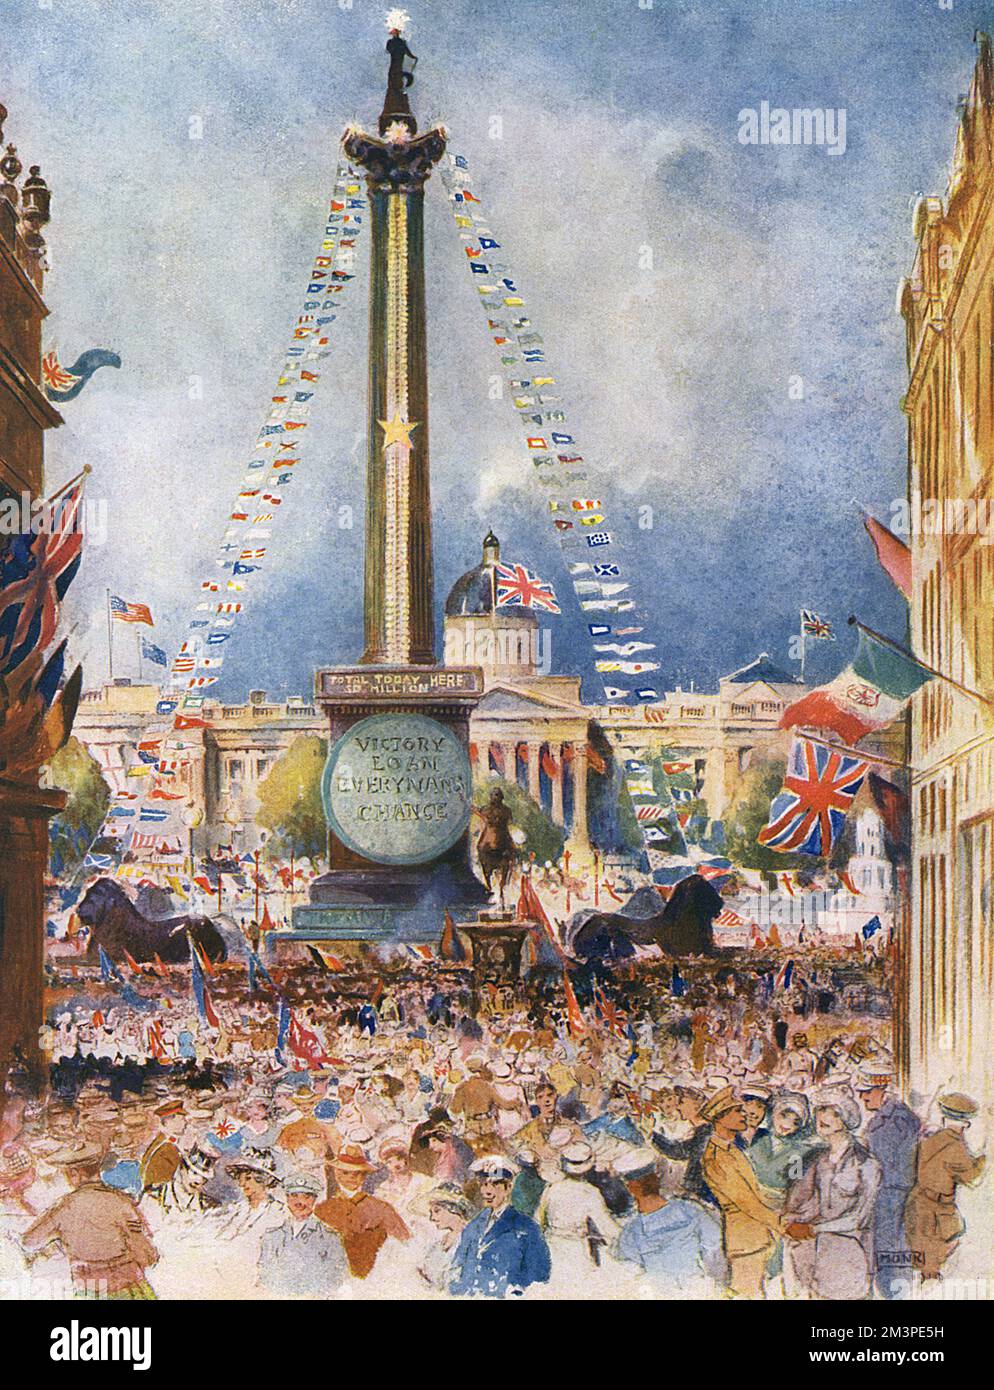 Trafalgar Square decorated for the peace celebrations following the signing of the Treaty of Versailles in July 1919.  Nelson's Column is decorated with flags and a large plaque encouraging the public to buy Victory Loans.       Date: 1919 Stock Photo